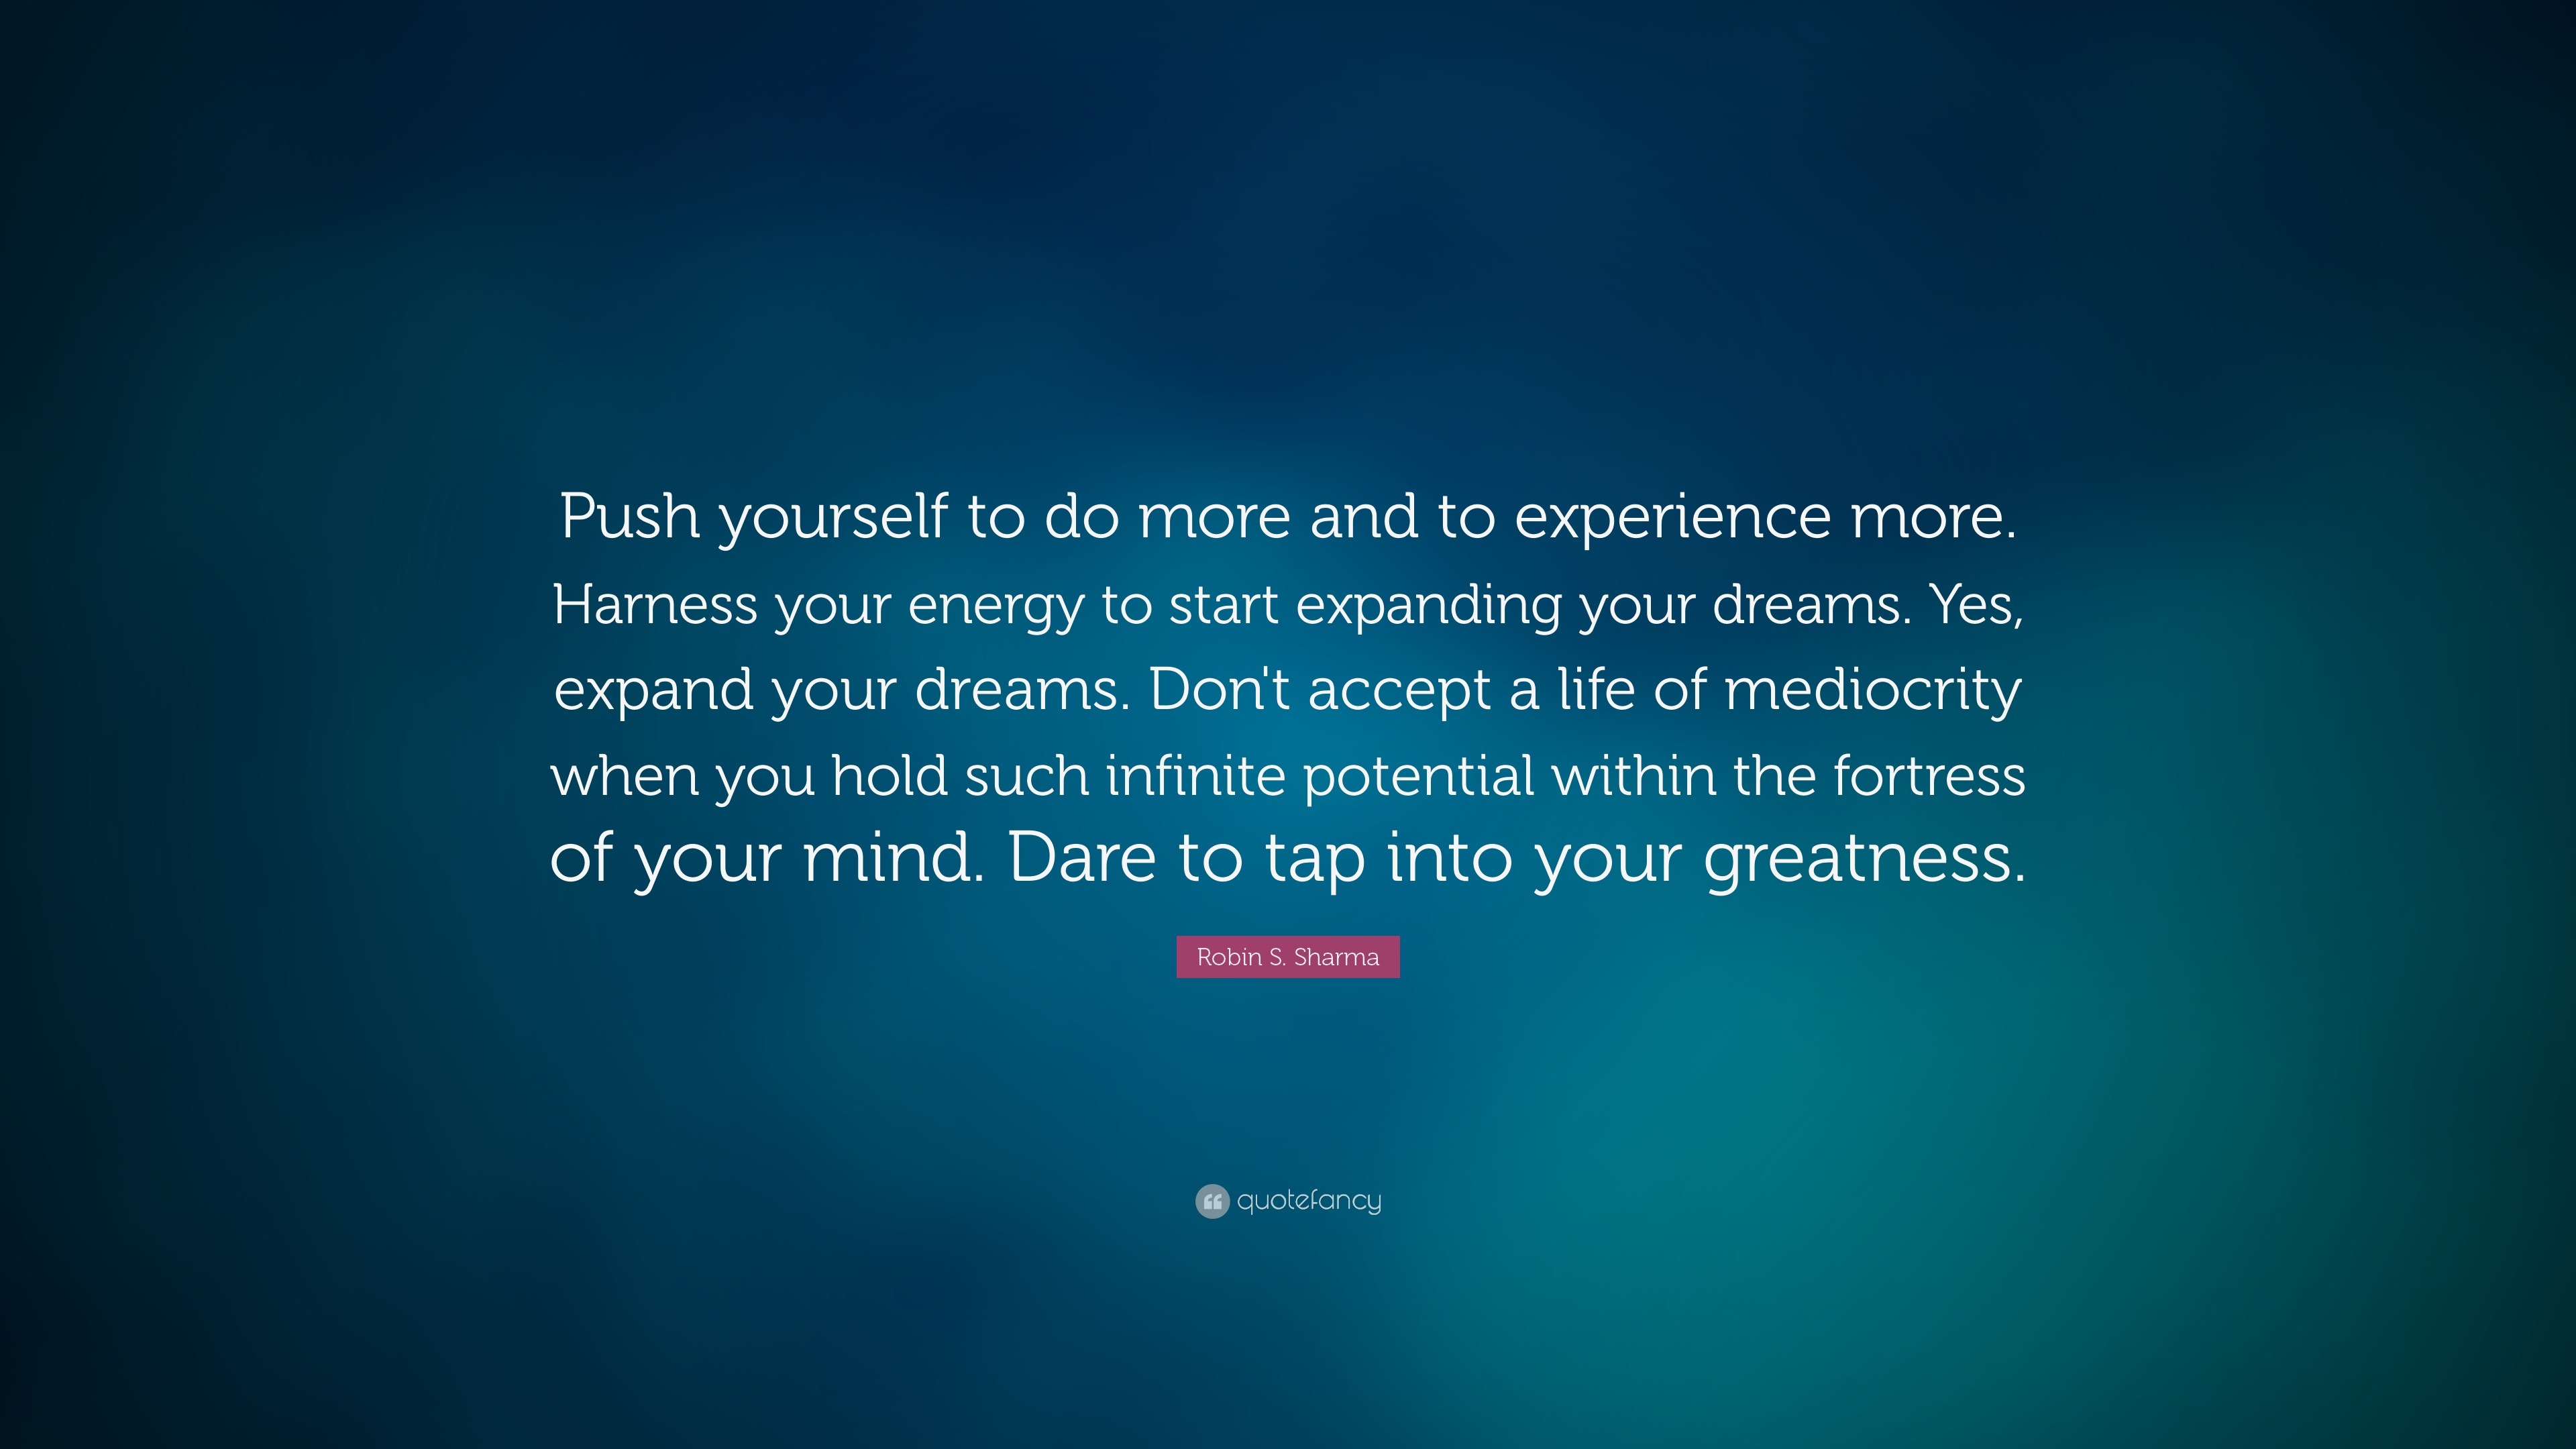 Robin S. Sharma Quote: “Push yourself to do more and to experience more ...